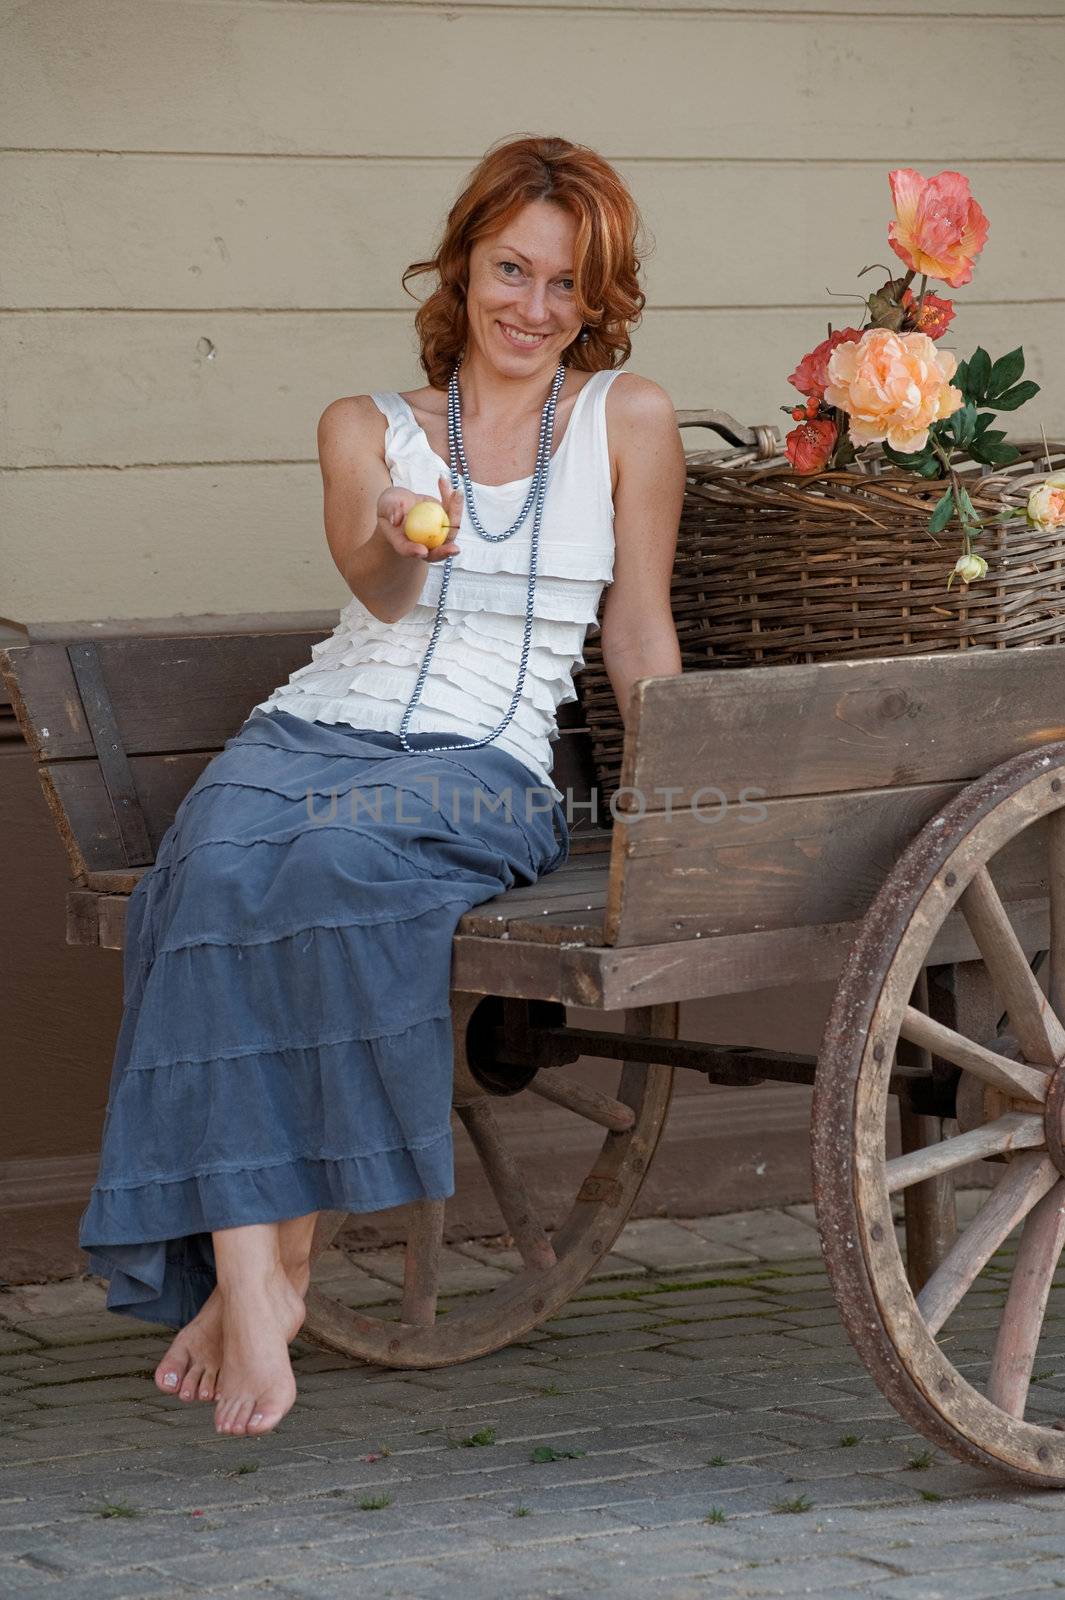 Adult smiling women with apple in hand sitting in old retro cart